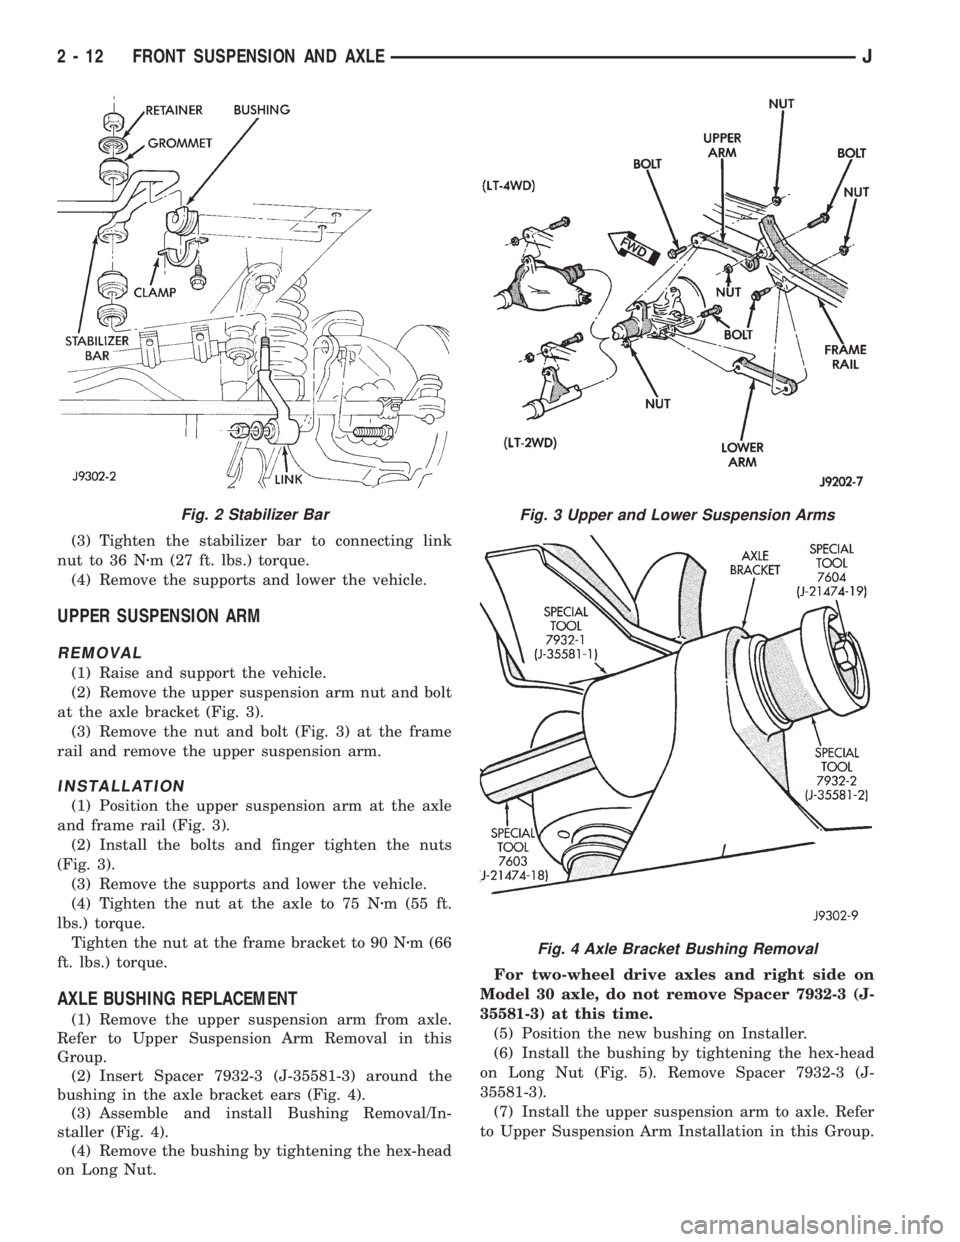 JEEP XJ 1995  Service And Repair Manual (3) Tighten the stabilizer bar to connecting link
nut to 36 Nzm (27 ft. lbs.) torque.
(4) Remove the supports and lower the vehicle.
UPPER SUSPENSION ARM
REMOVAL
(1) Raise and support the vehicle.
(2)